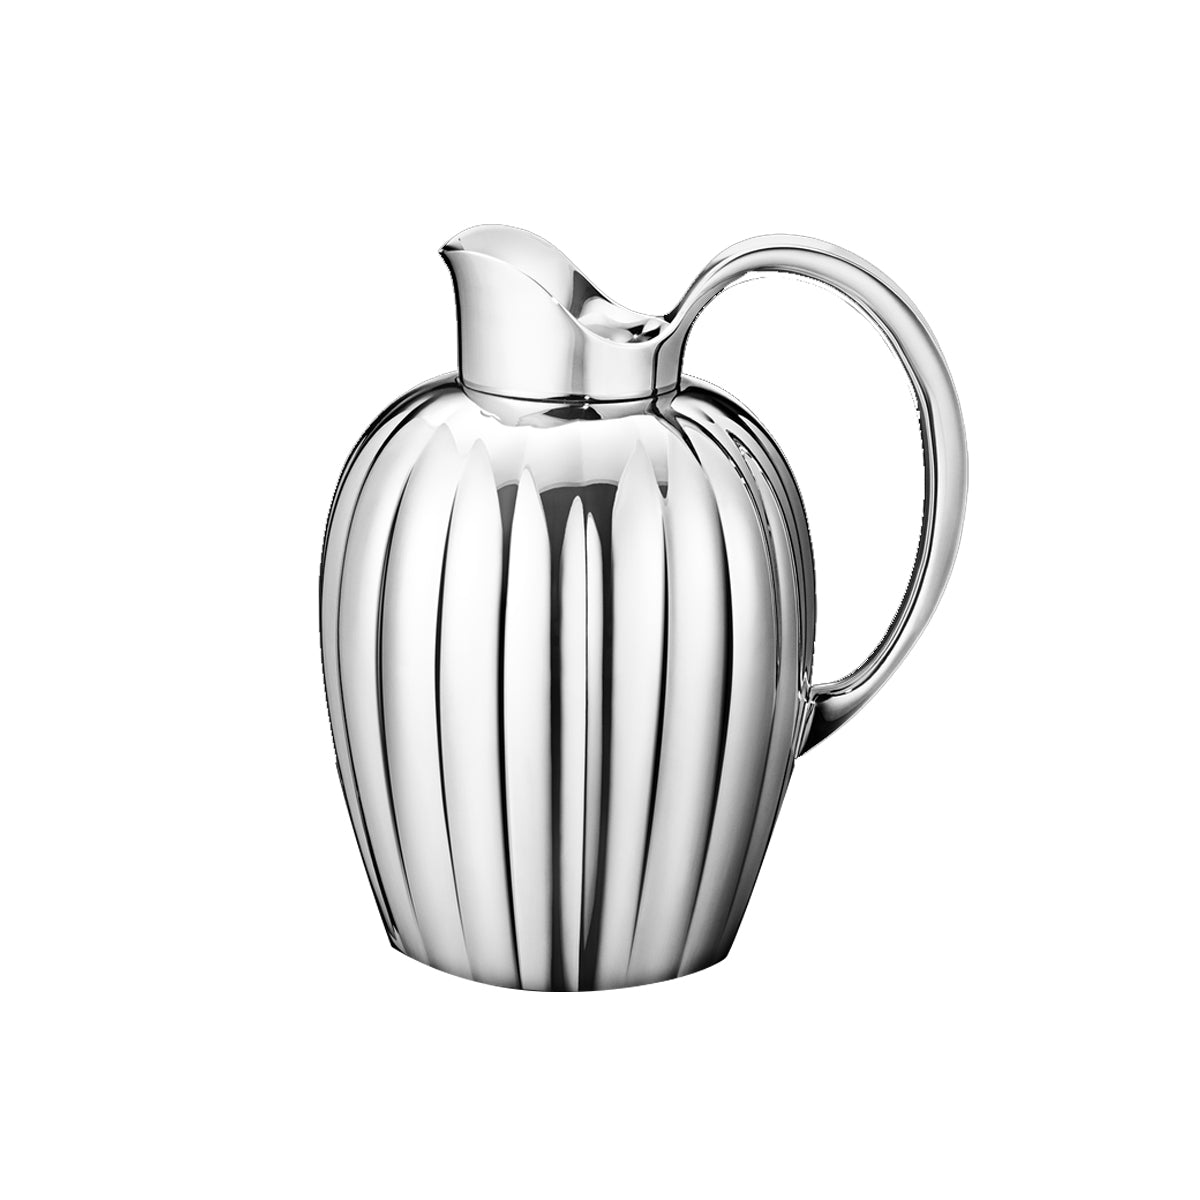 Dominant Jumping jack Consequent Bernadotte Water/Juice Carafe 1.6 L – S K E T C H